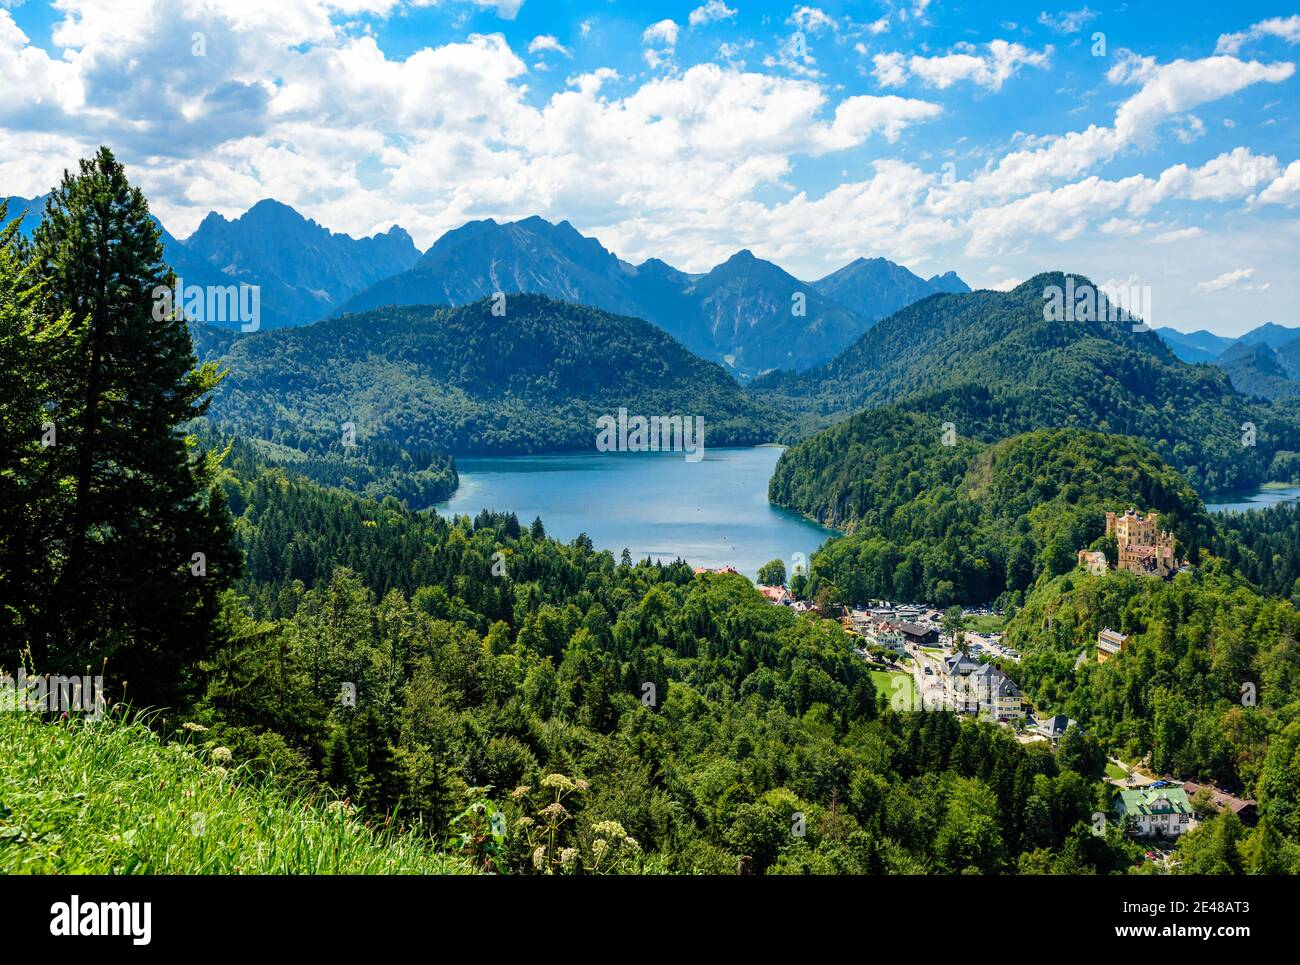 View on Alpsee and  Ludwig II Castle Hohenschwangau, blue sky, alps mountains nearby Neuschwanstein. Fussen, Bavaria, Bayern, Germany. Stock Photo